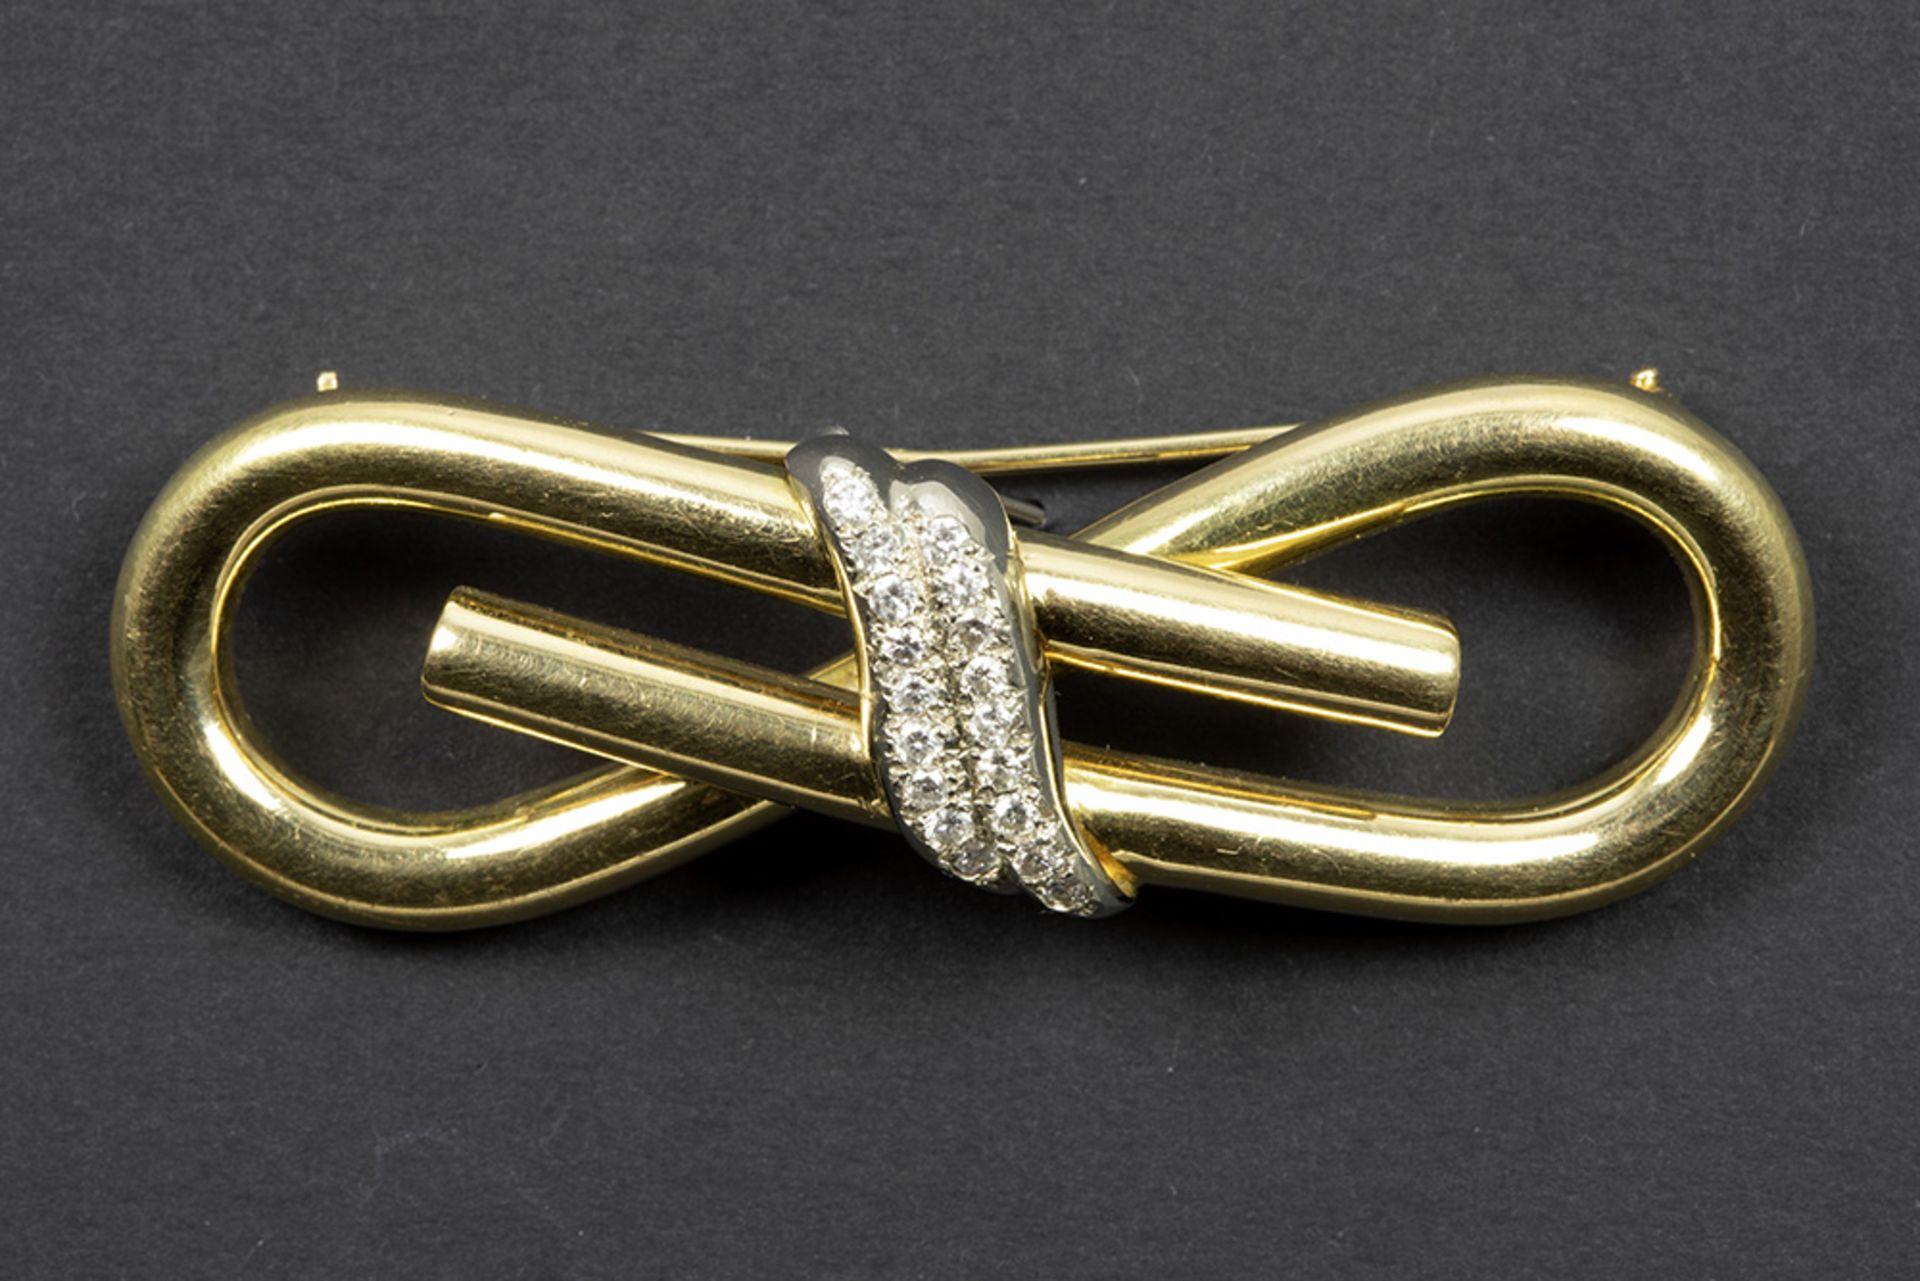 eighties' vintage brooch in white and yellow gold (18 carat) with at least 0,60 carat of brilliant